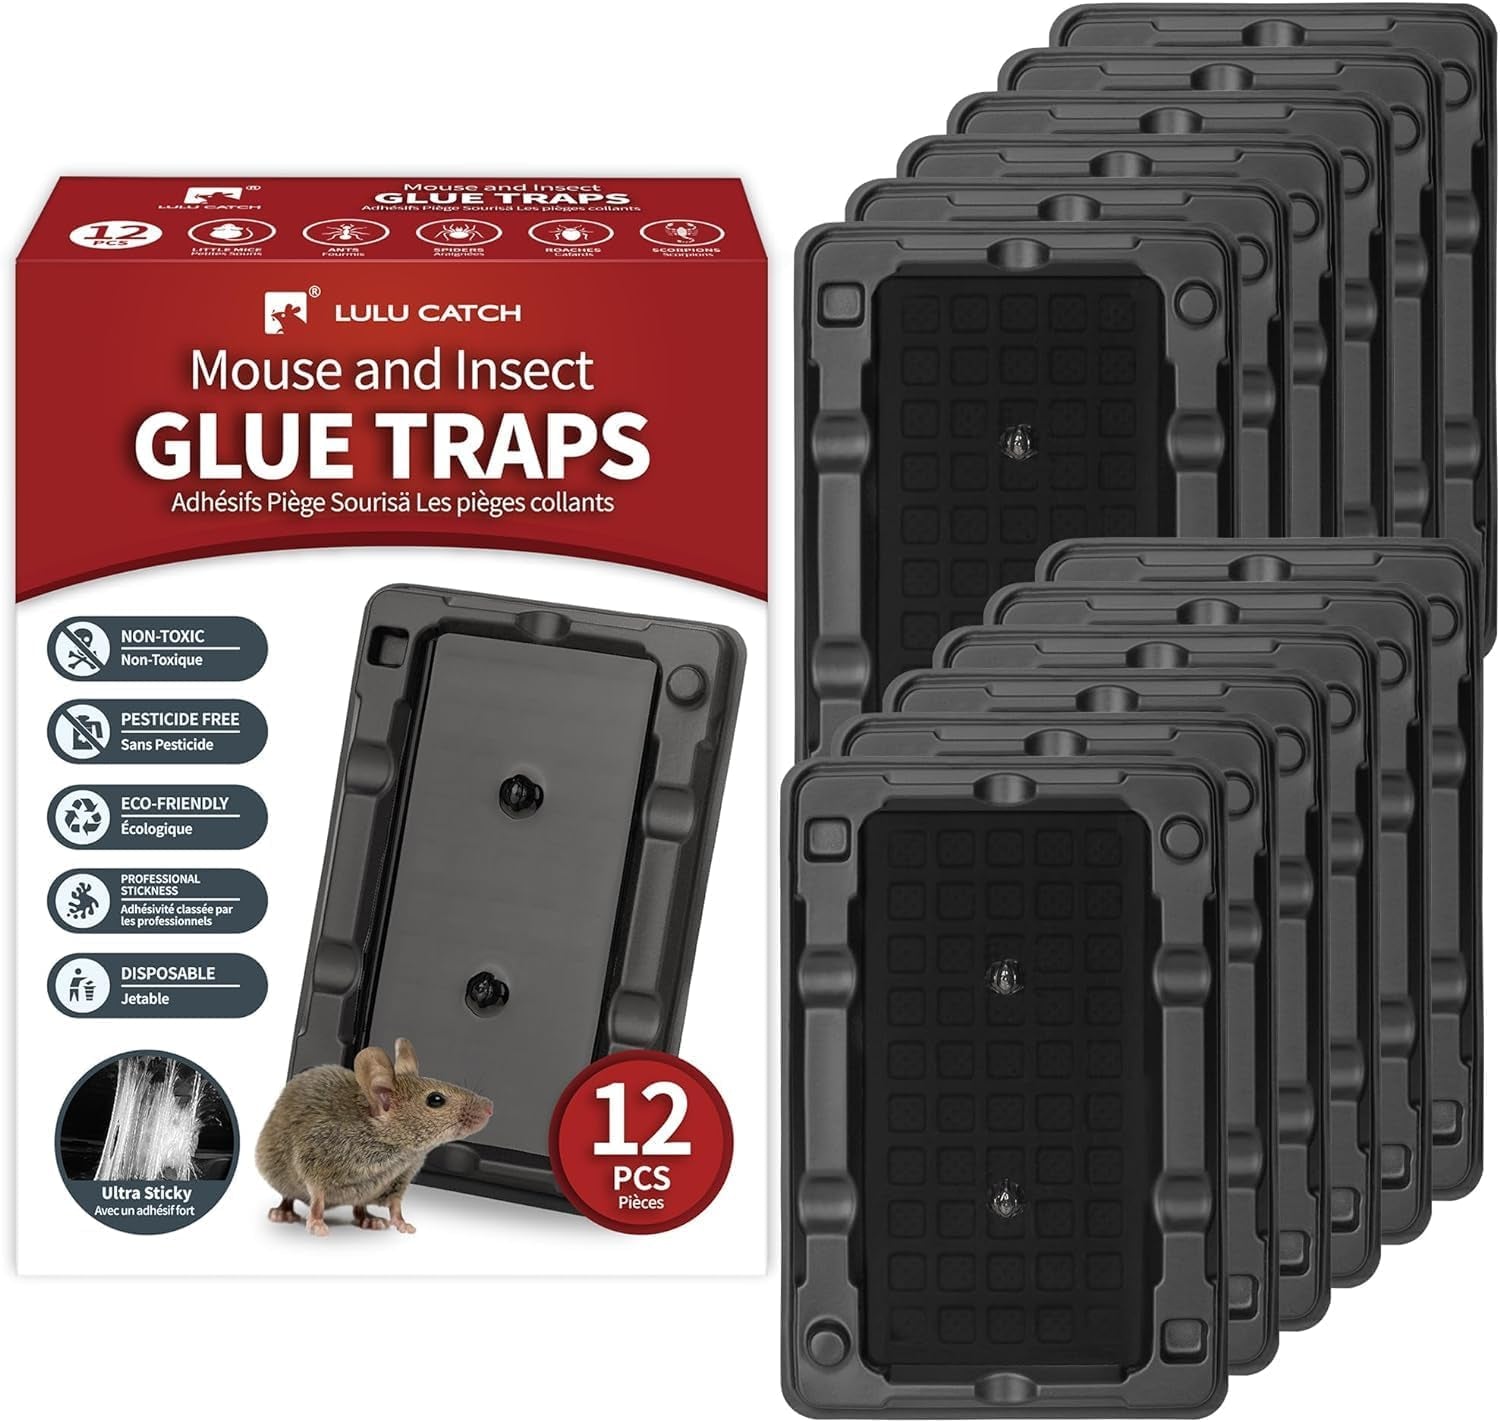 What are the features of the TrapX Smart AI ML Mouse Trap Sensor for pest control?